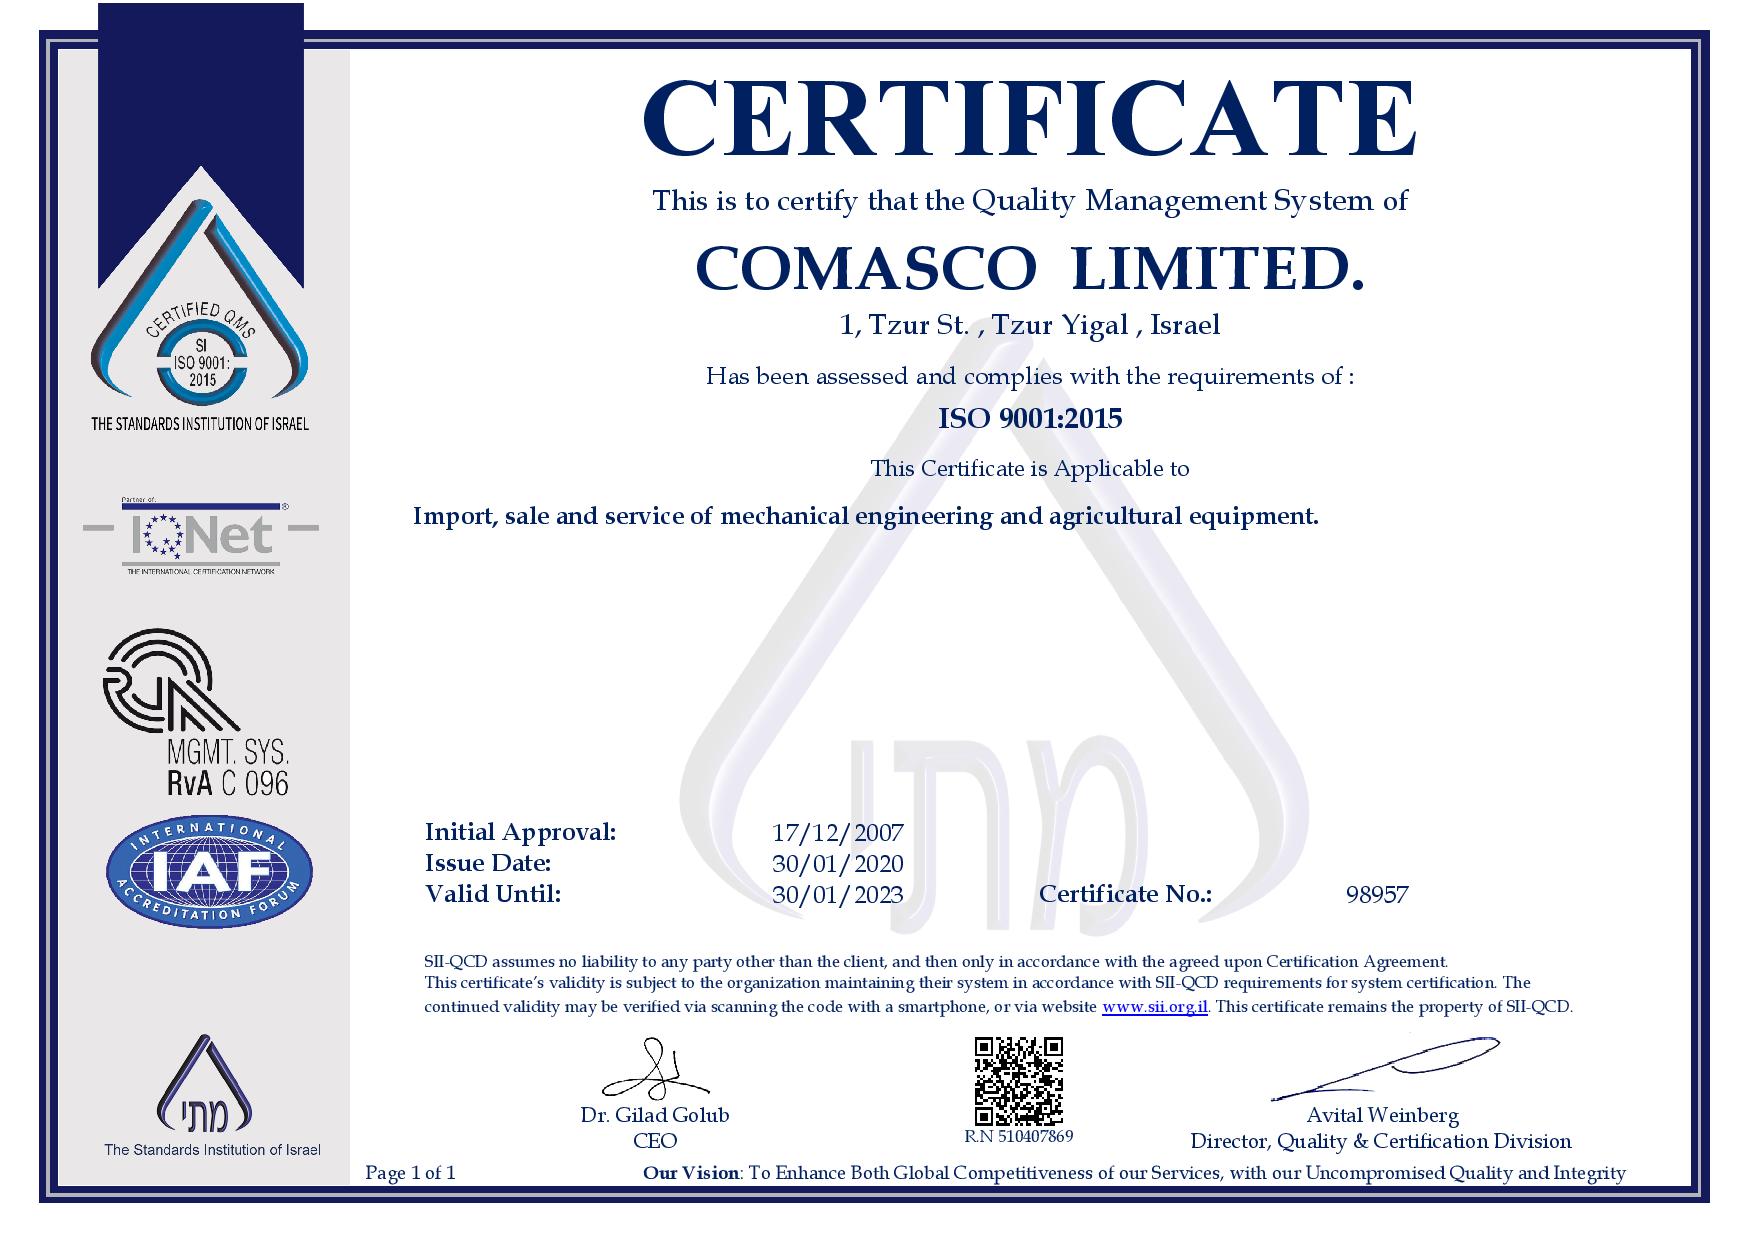 ISO 9001 Quality Management System certification